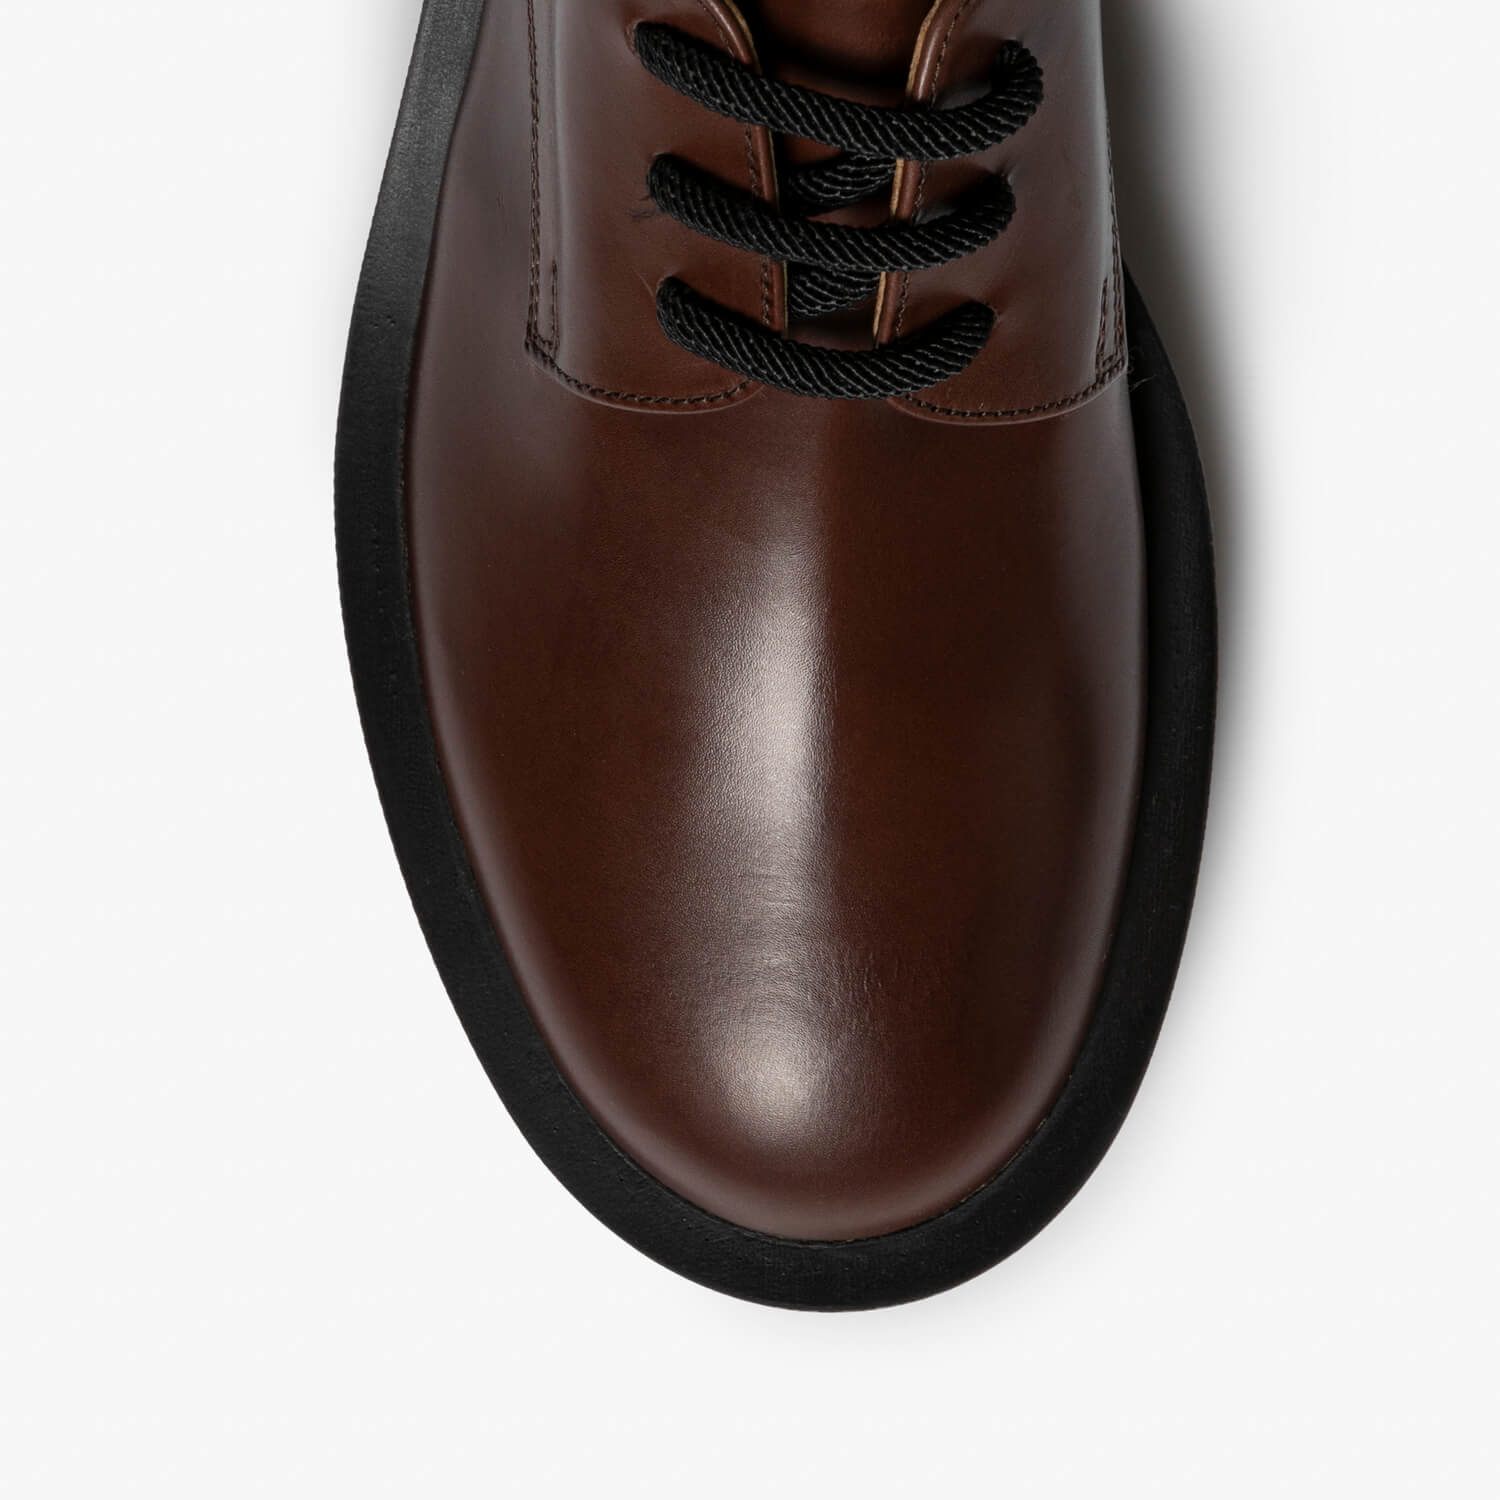 Marcella | Women's Leather derby lace-up